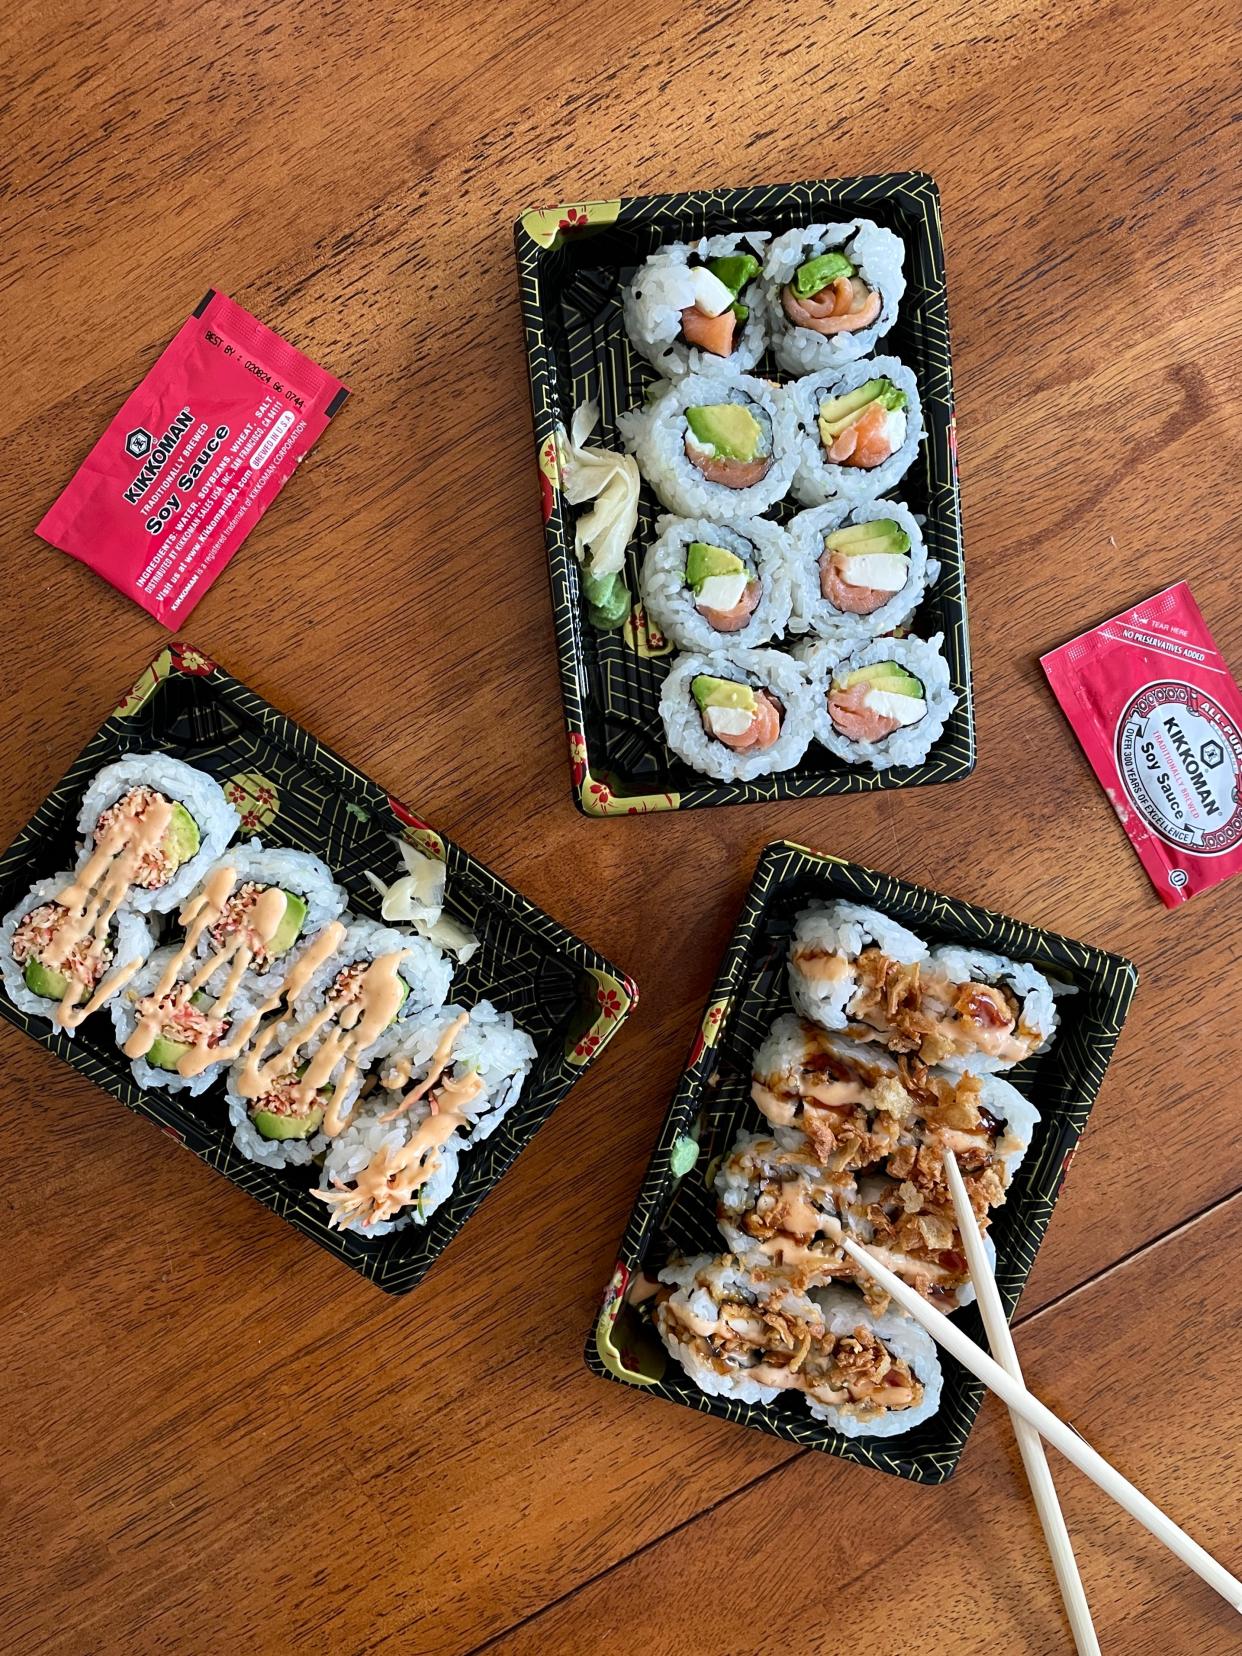 Thai Lanna & Sushi Bar offers cooked and raw sushi rolls for $4.99 on Mondays.